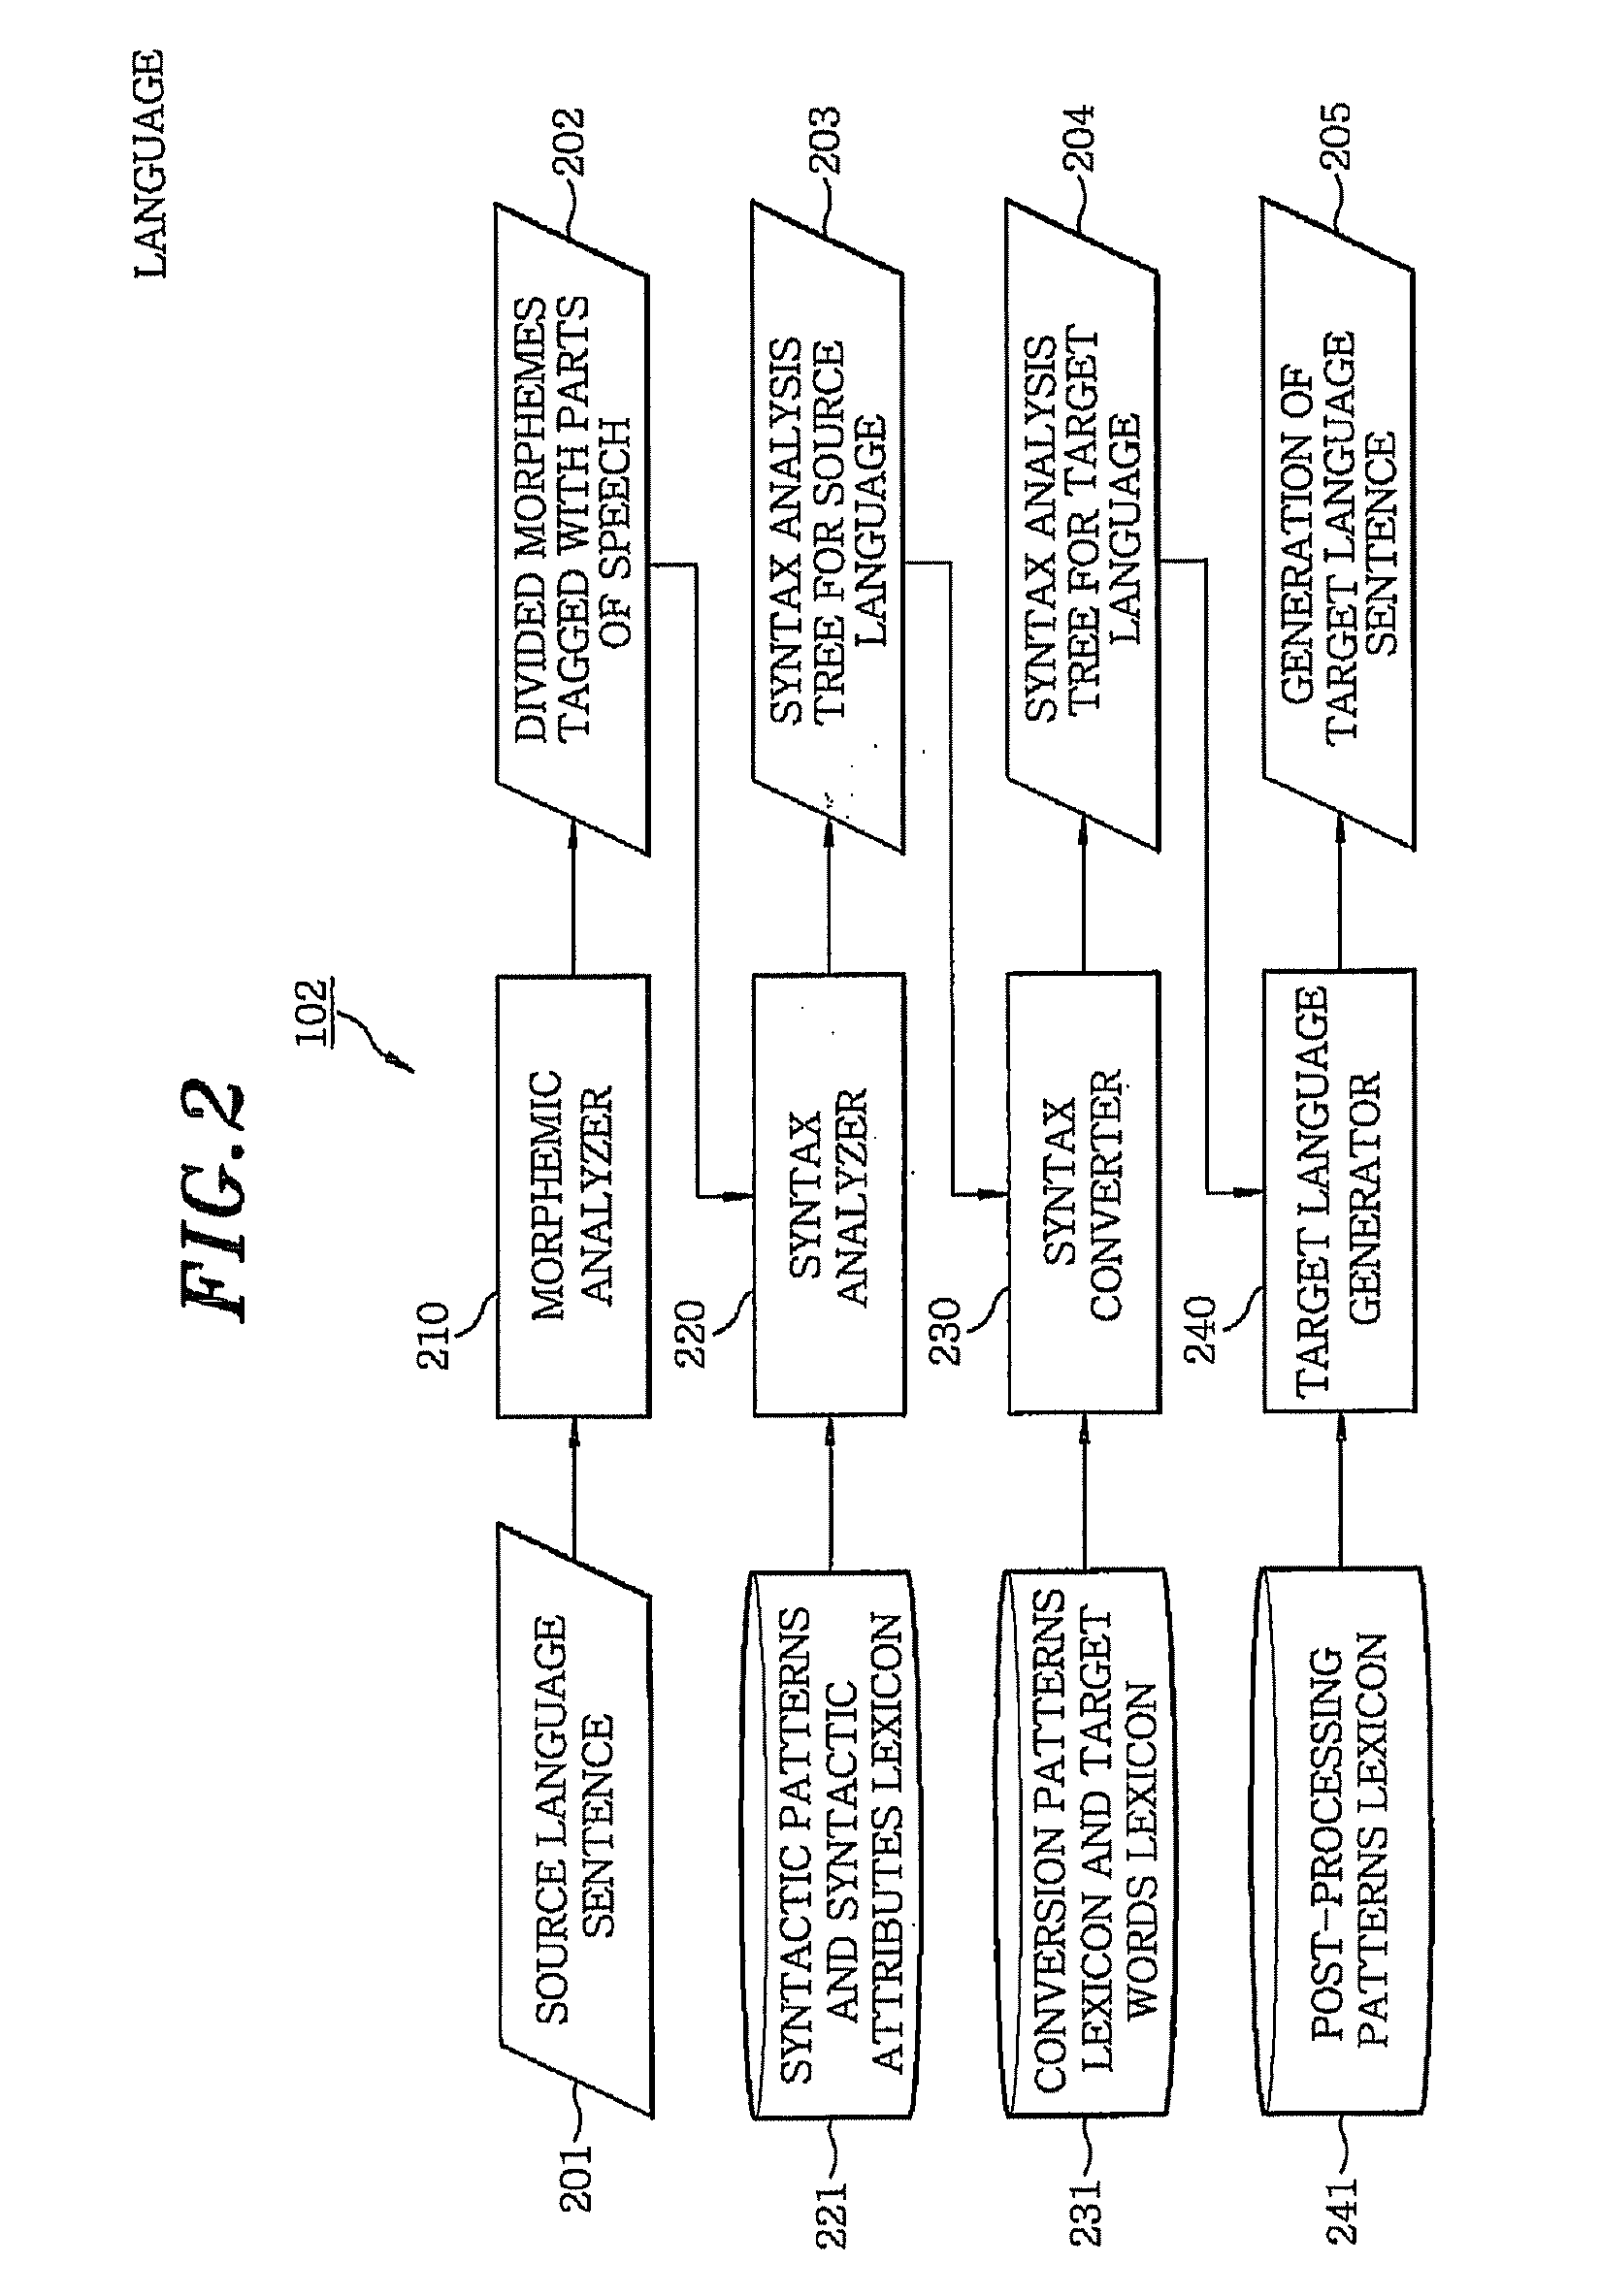 Method and apparatus for detecting errors in machine translation using parallel corpus